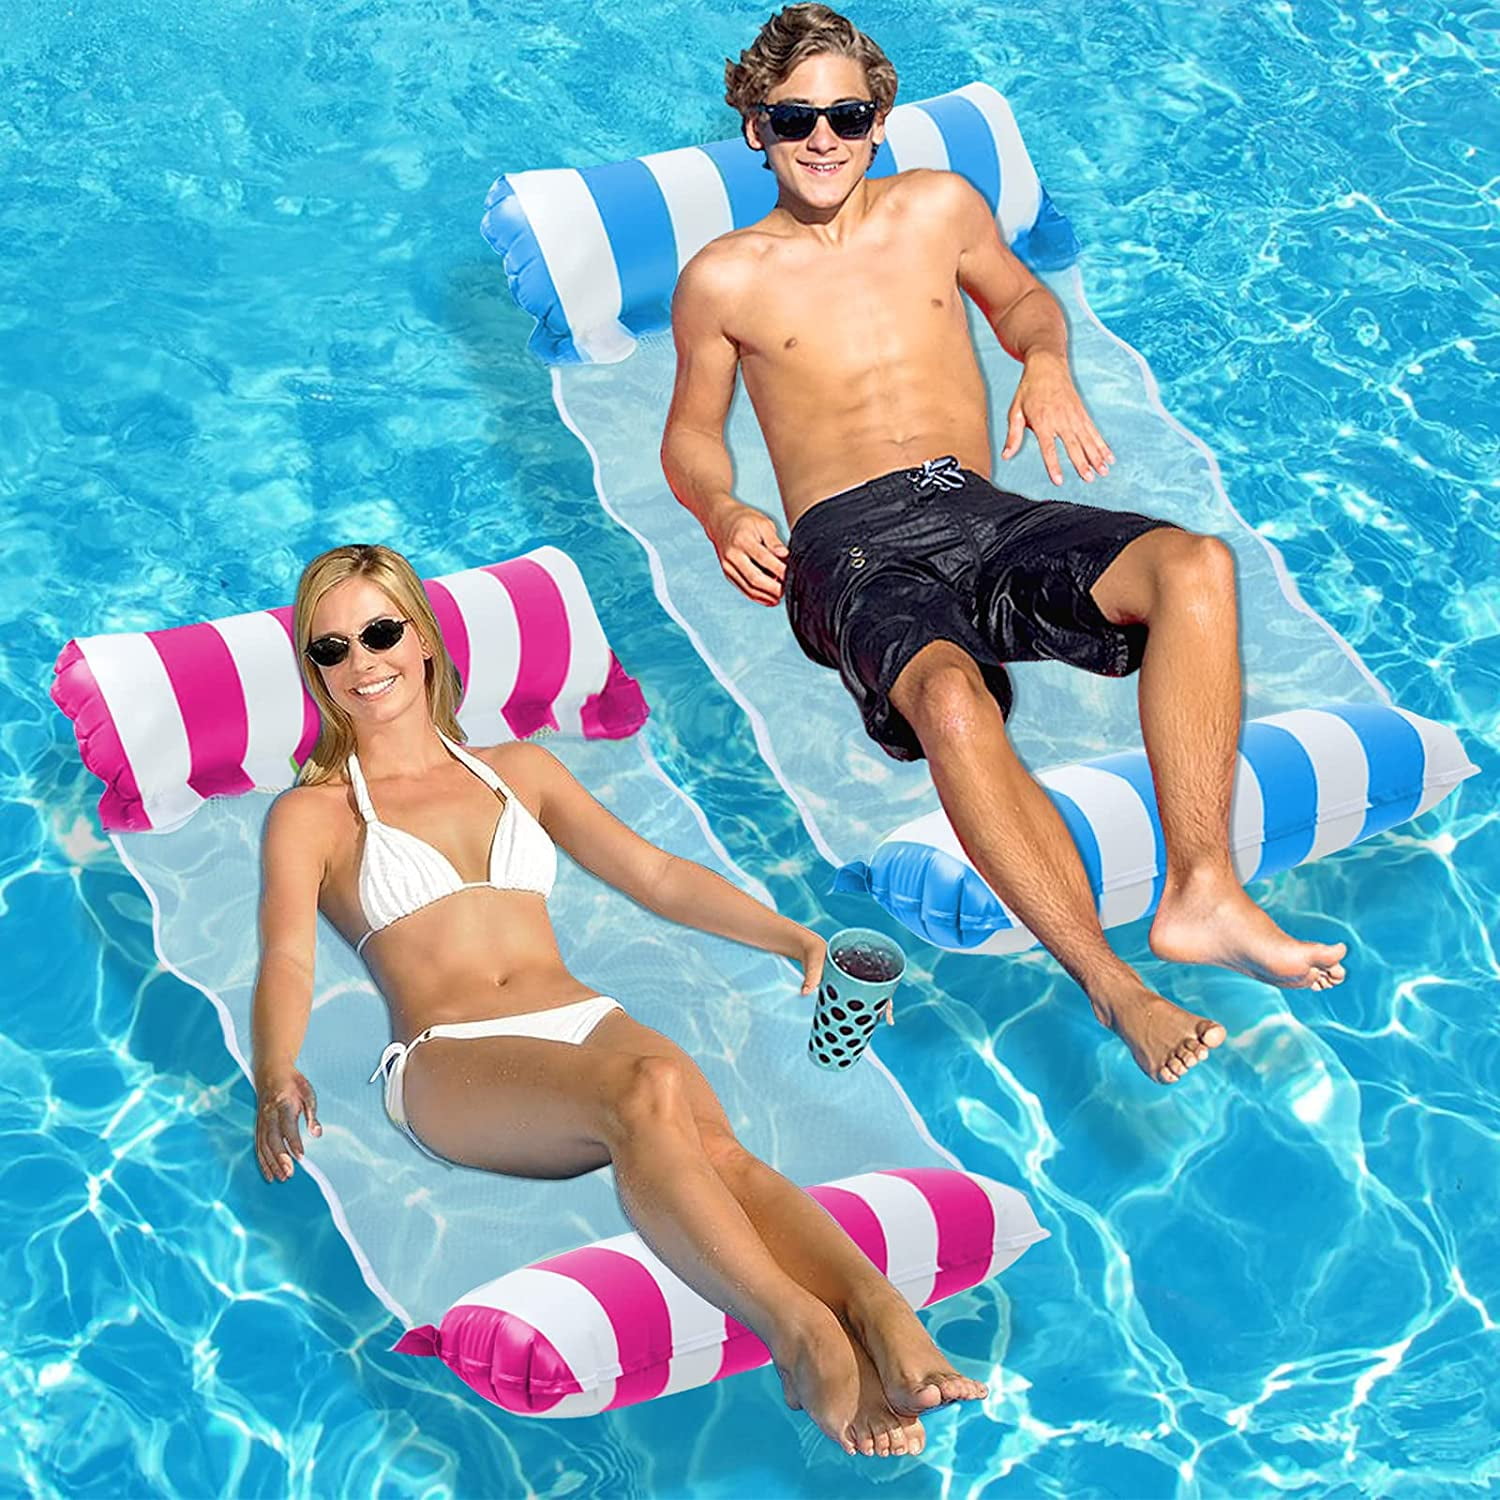 Inflatable Floating Lounge Swim Pool Beach Chair Float Lounger Raft Water Bed US 